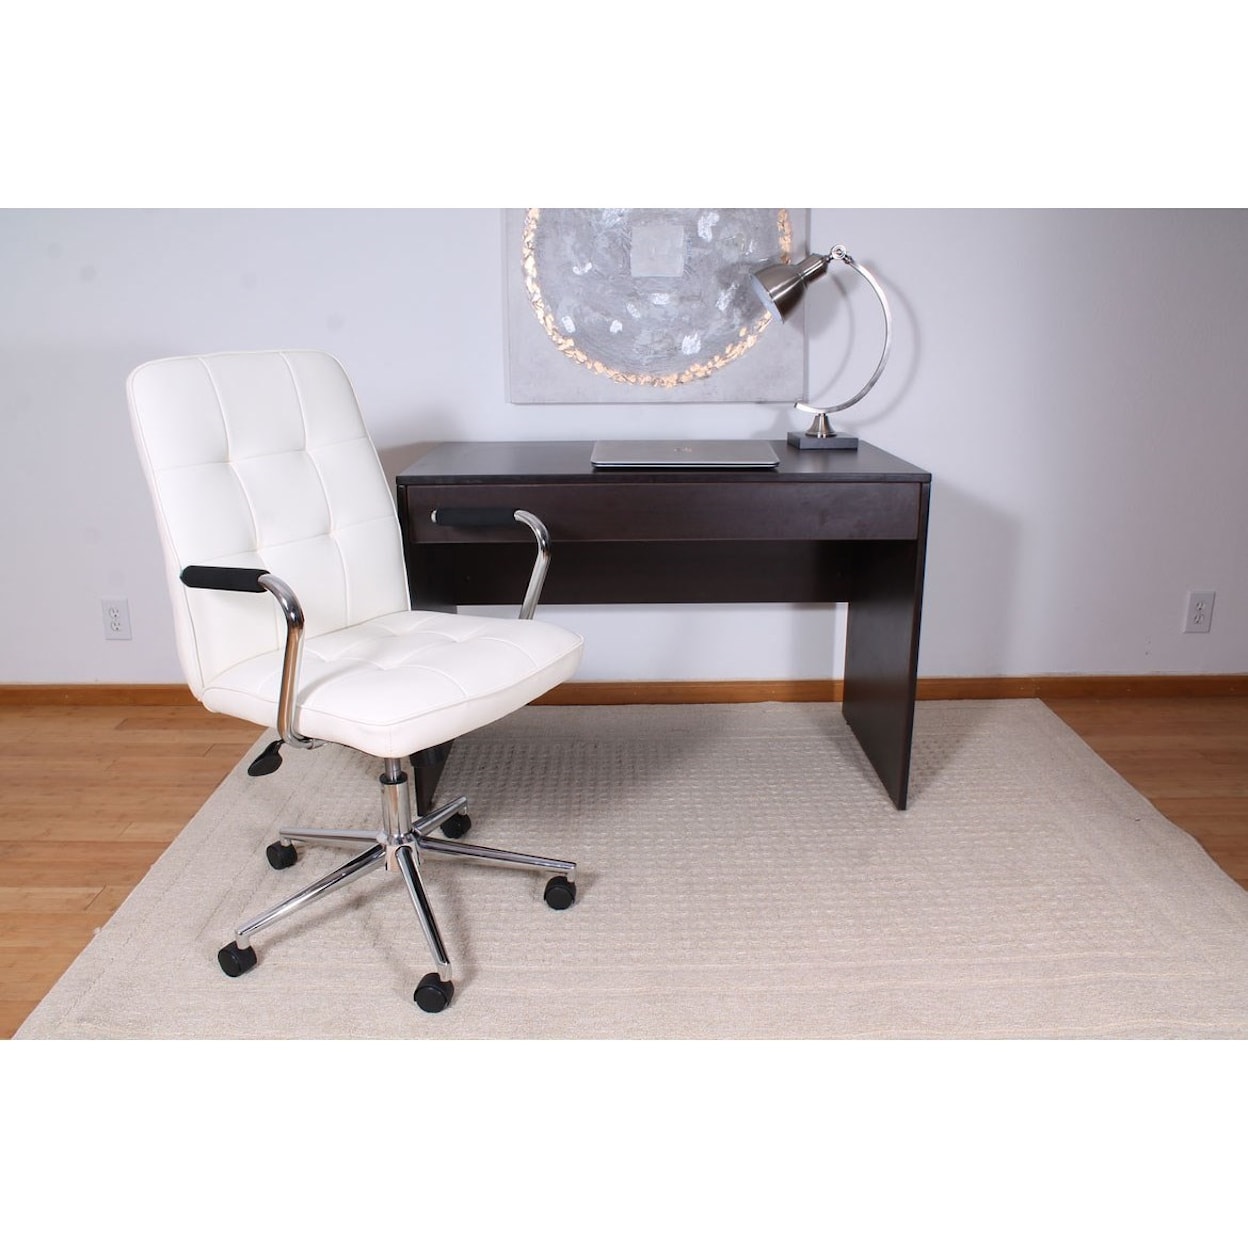 Presidential Seating Task Chairs Modern Office Chair w/ Chrome Arms